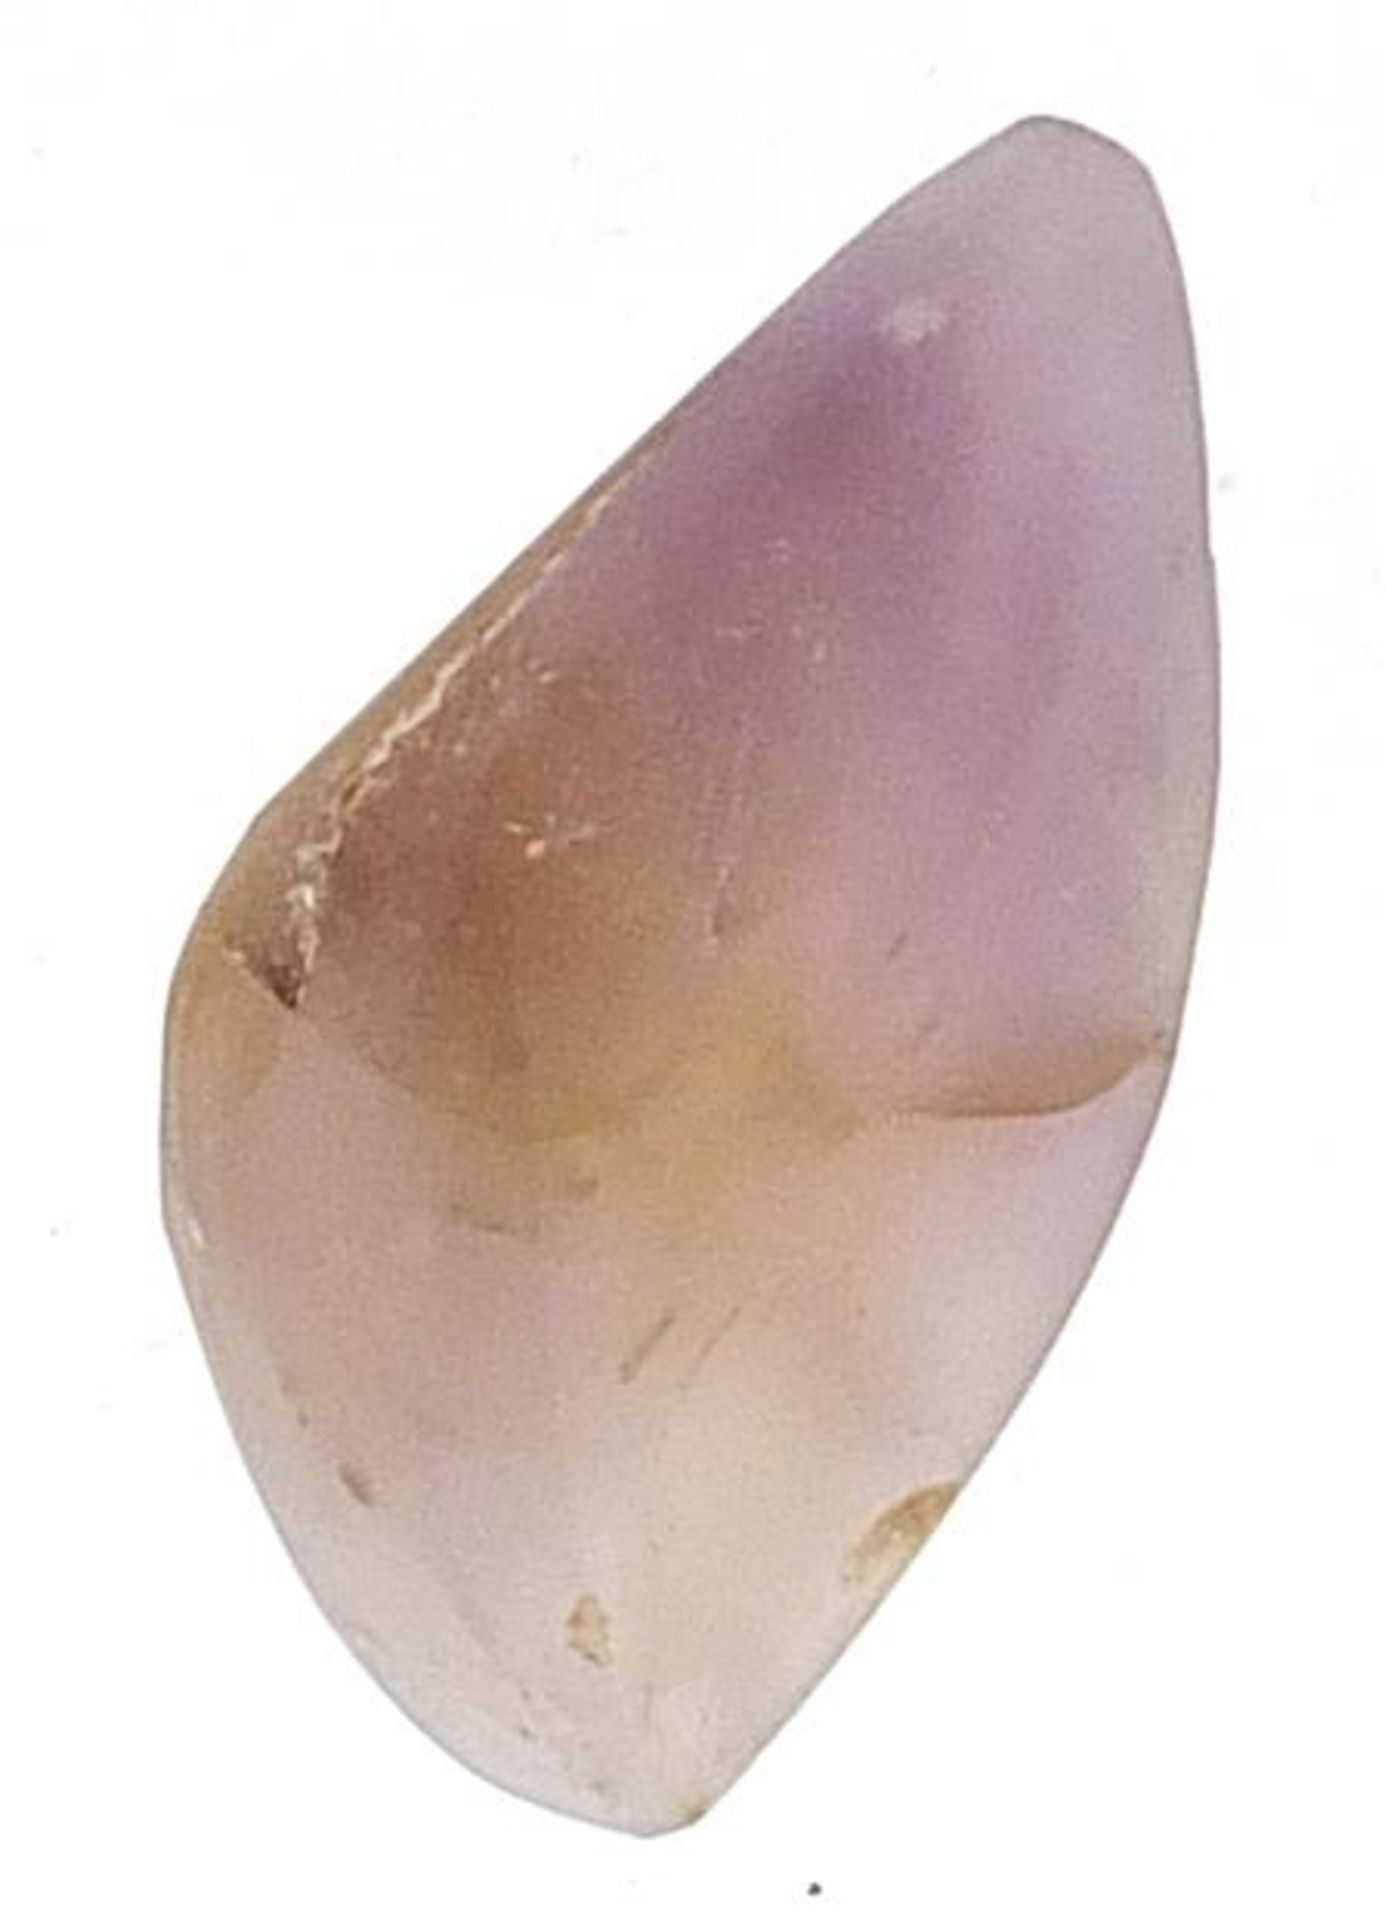 Fancy cut amethyst gemstone with certificate, approximately 57.200 carat - Image 2 of 3